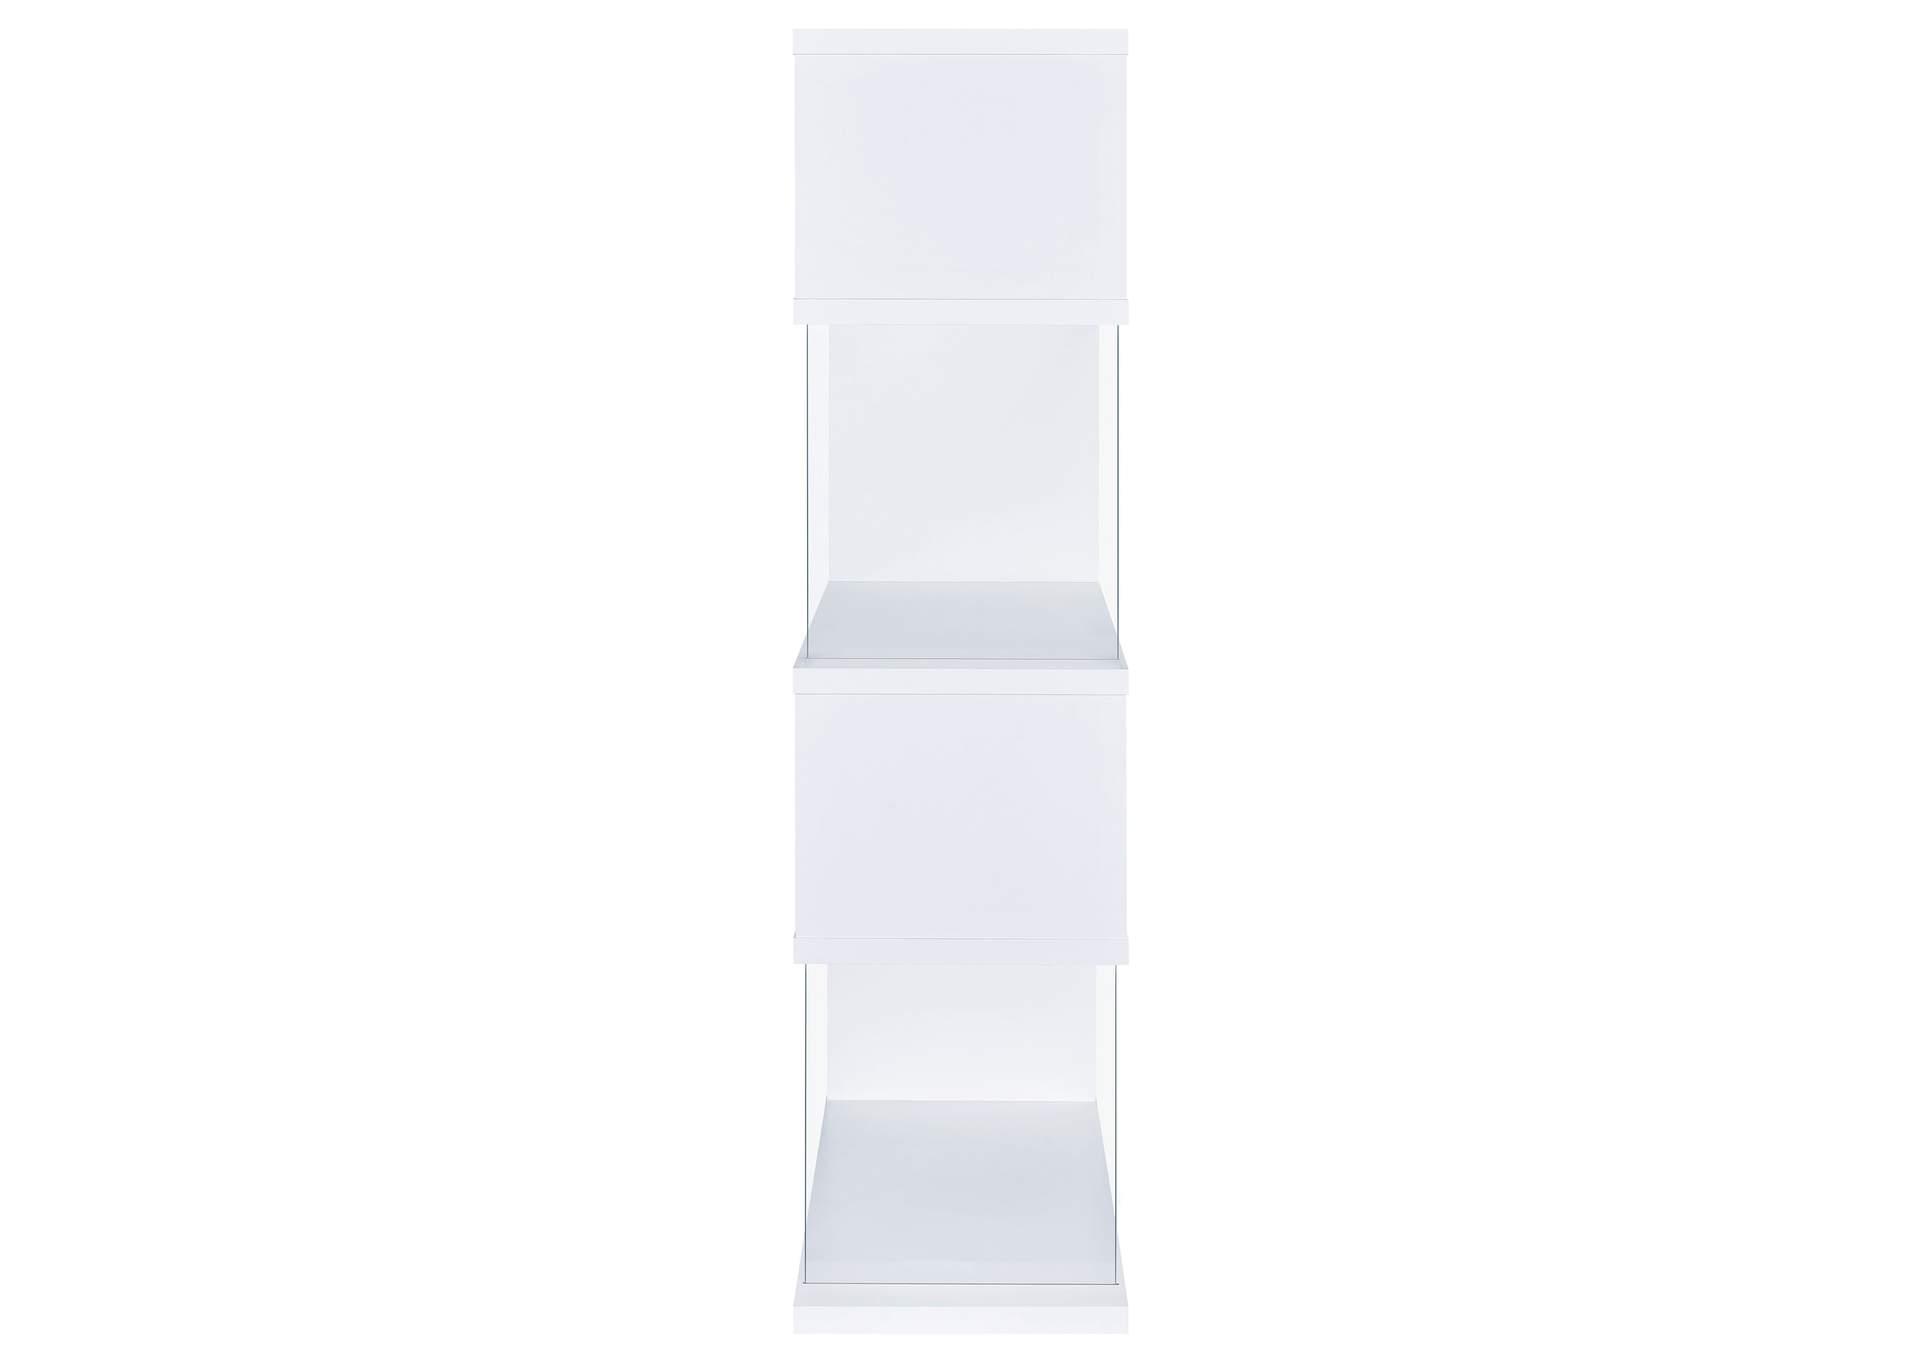 Emelle 4-tier Bookcase White and Clear,Coaster Furniture